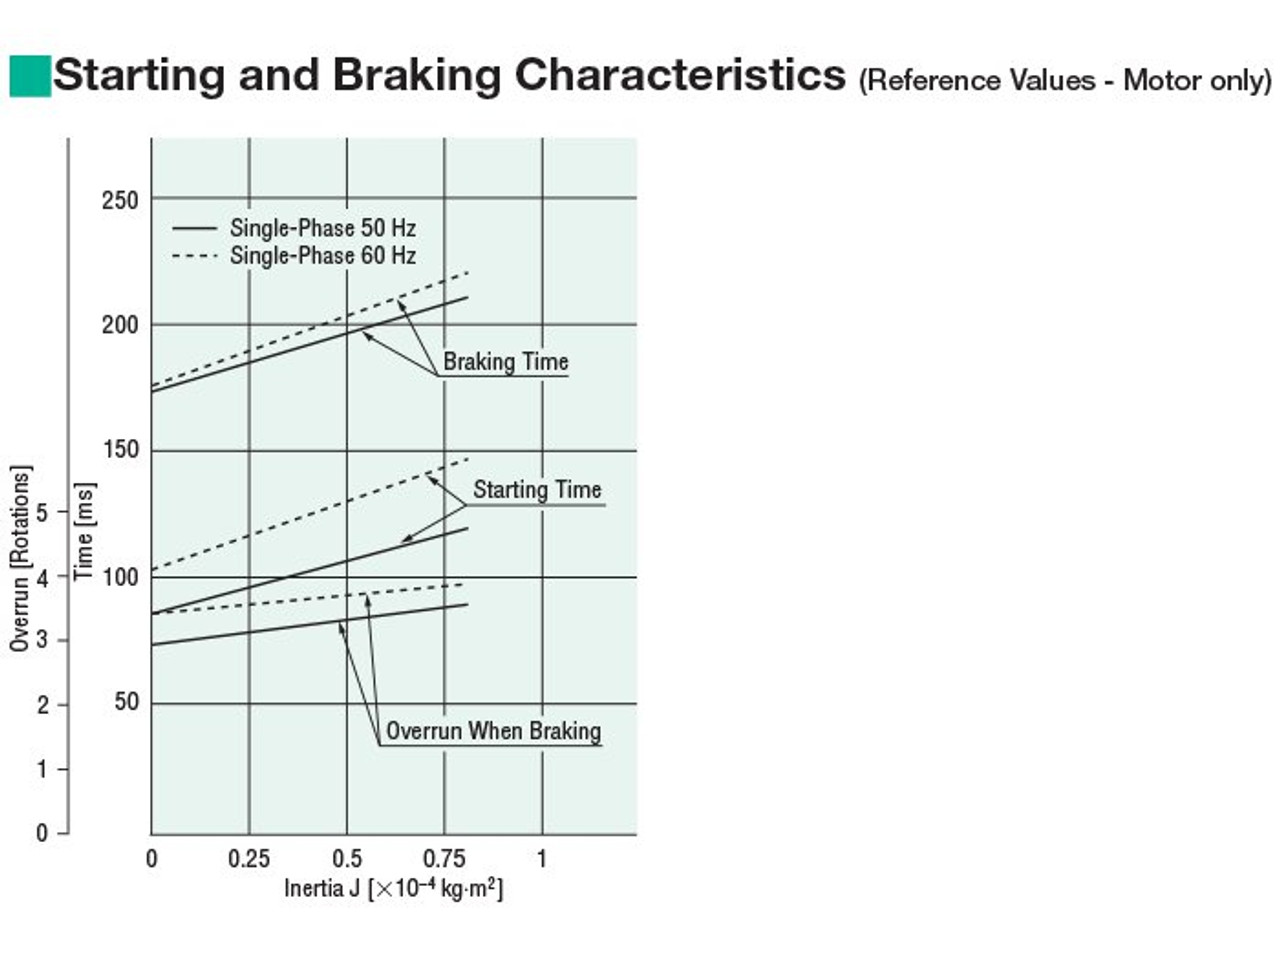 5RK40UAMT2-50 - Brake Specifications